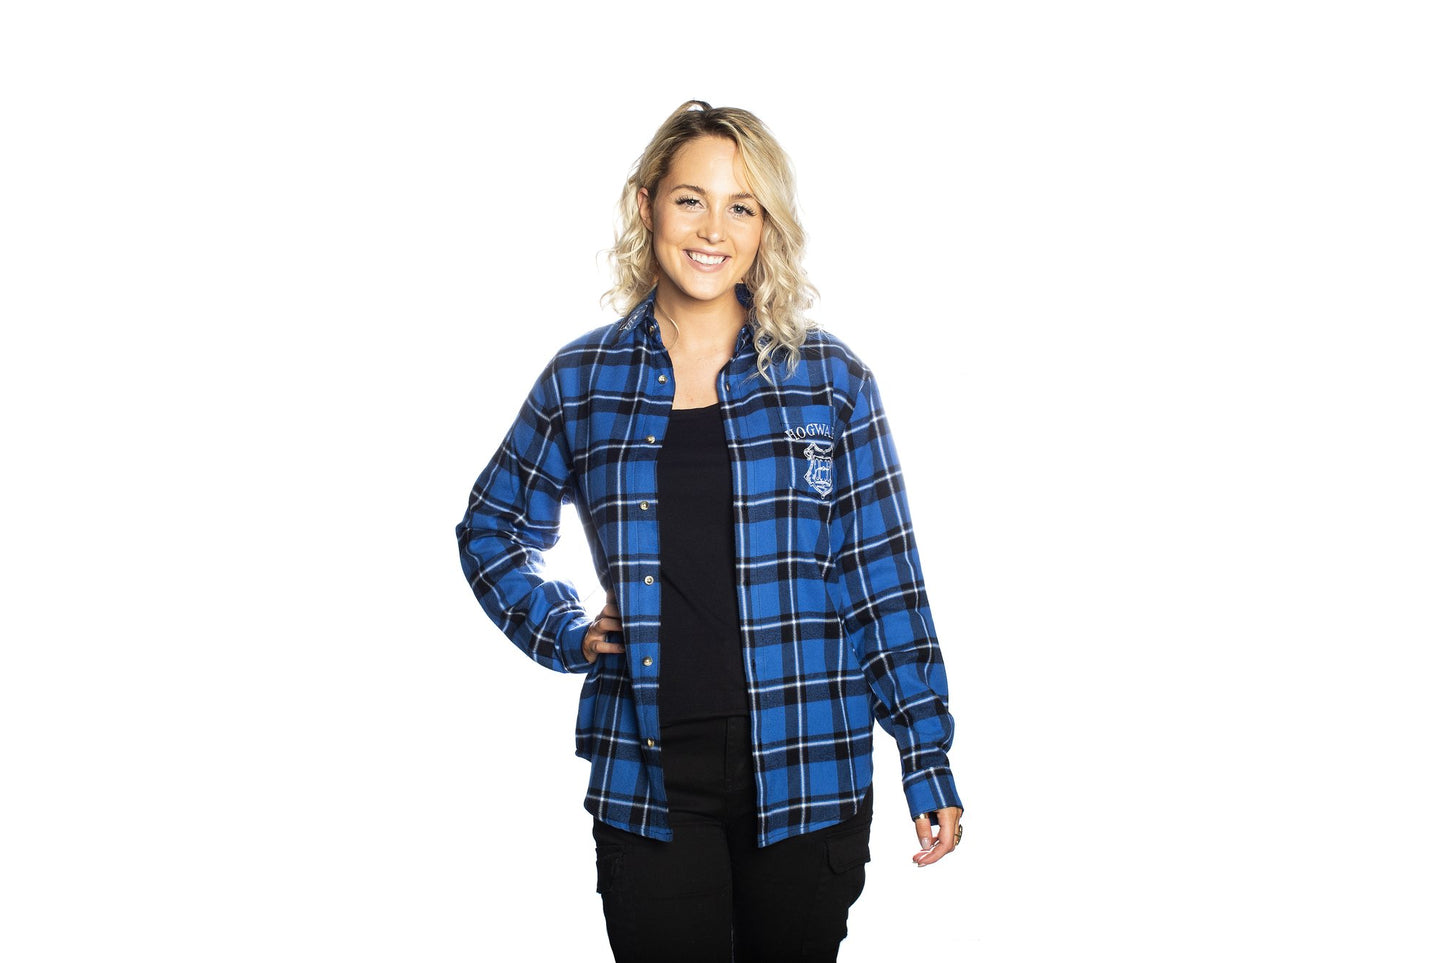 Load image into Gallery viewer, Ravenclaw House Crest (Harry Potter) Flannel Shirt by Cakeworthy
